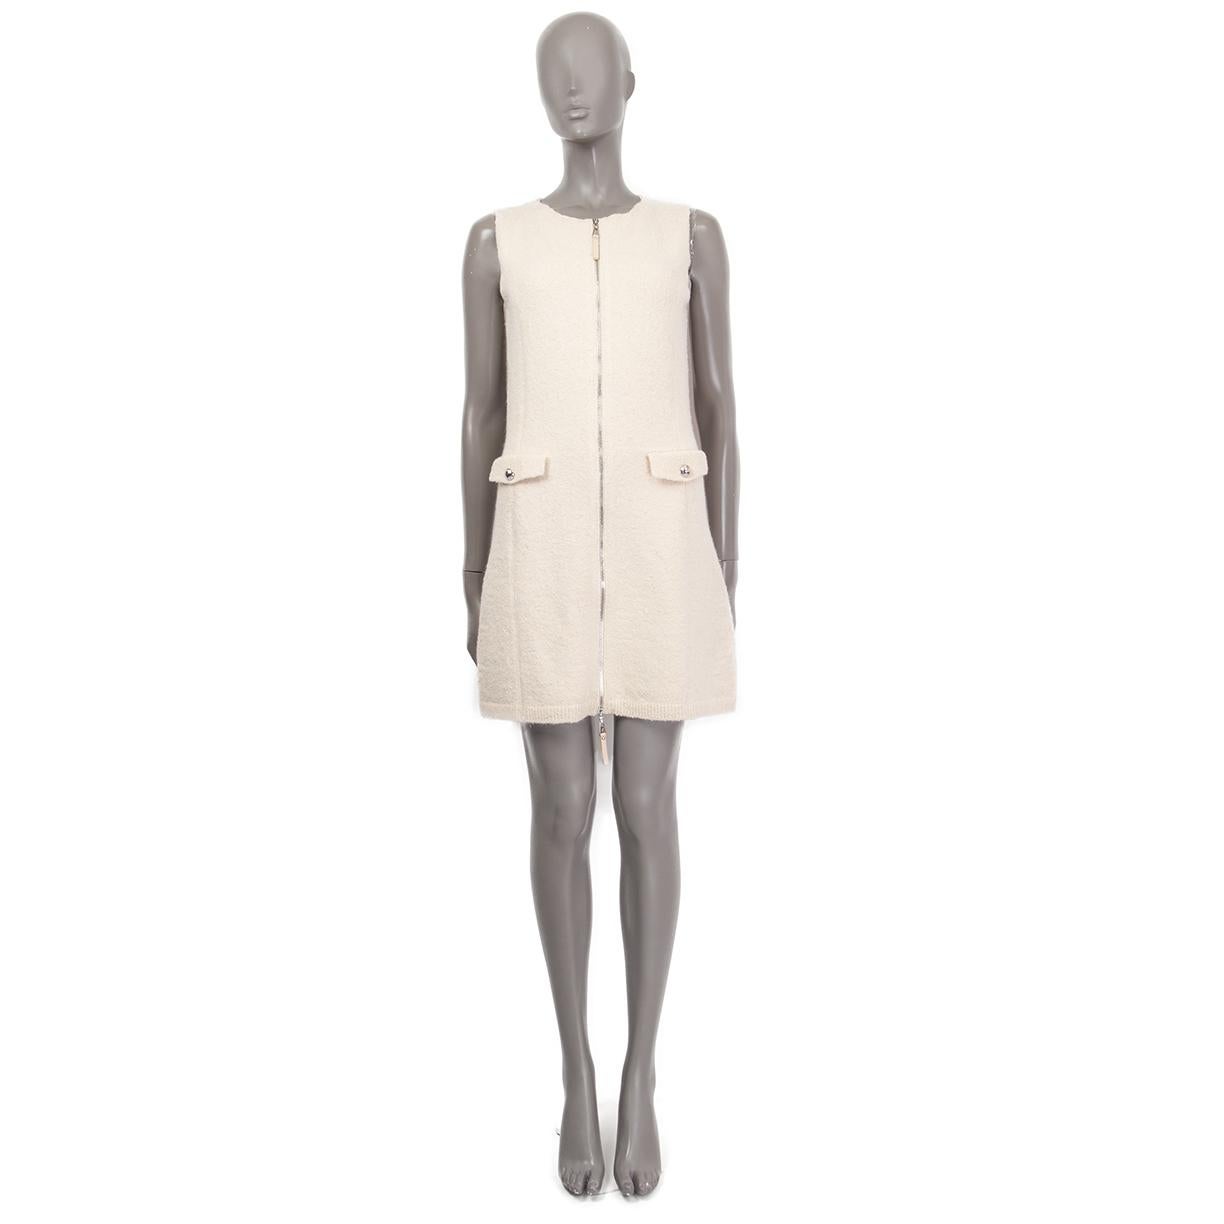 100% authentic Louis Vuitton sleeveless zip-front dress in off-white and cream silk (53%), mohair (22%), polyamide (16%), elastane (5%) and wool (4%). Has two faux flap pockets on the front with silver-tone logo buttons. Lined in silk (with 6%